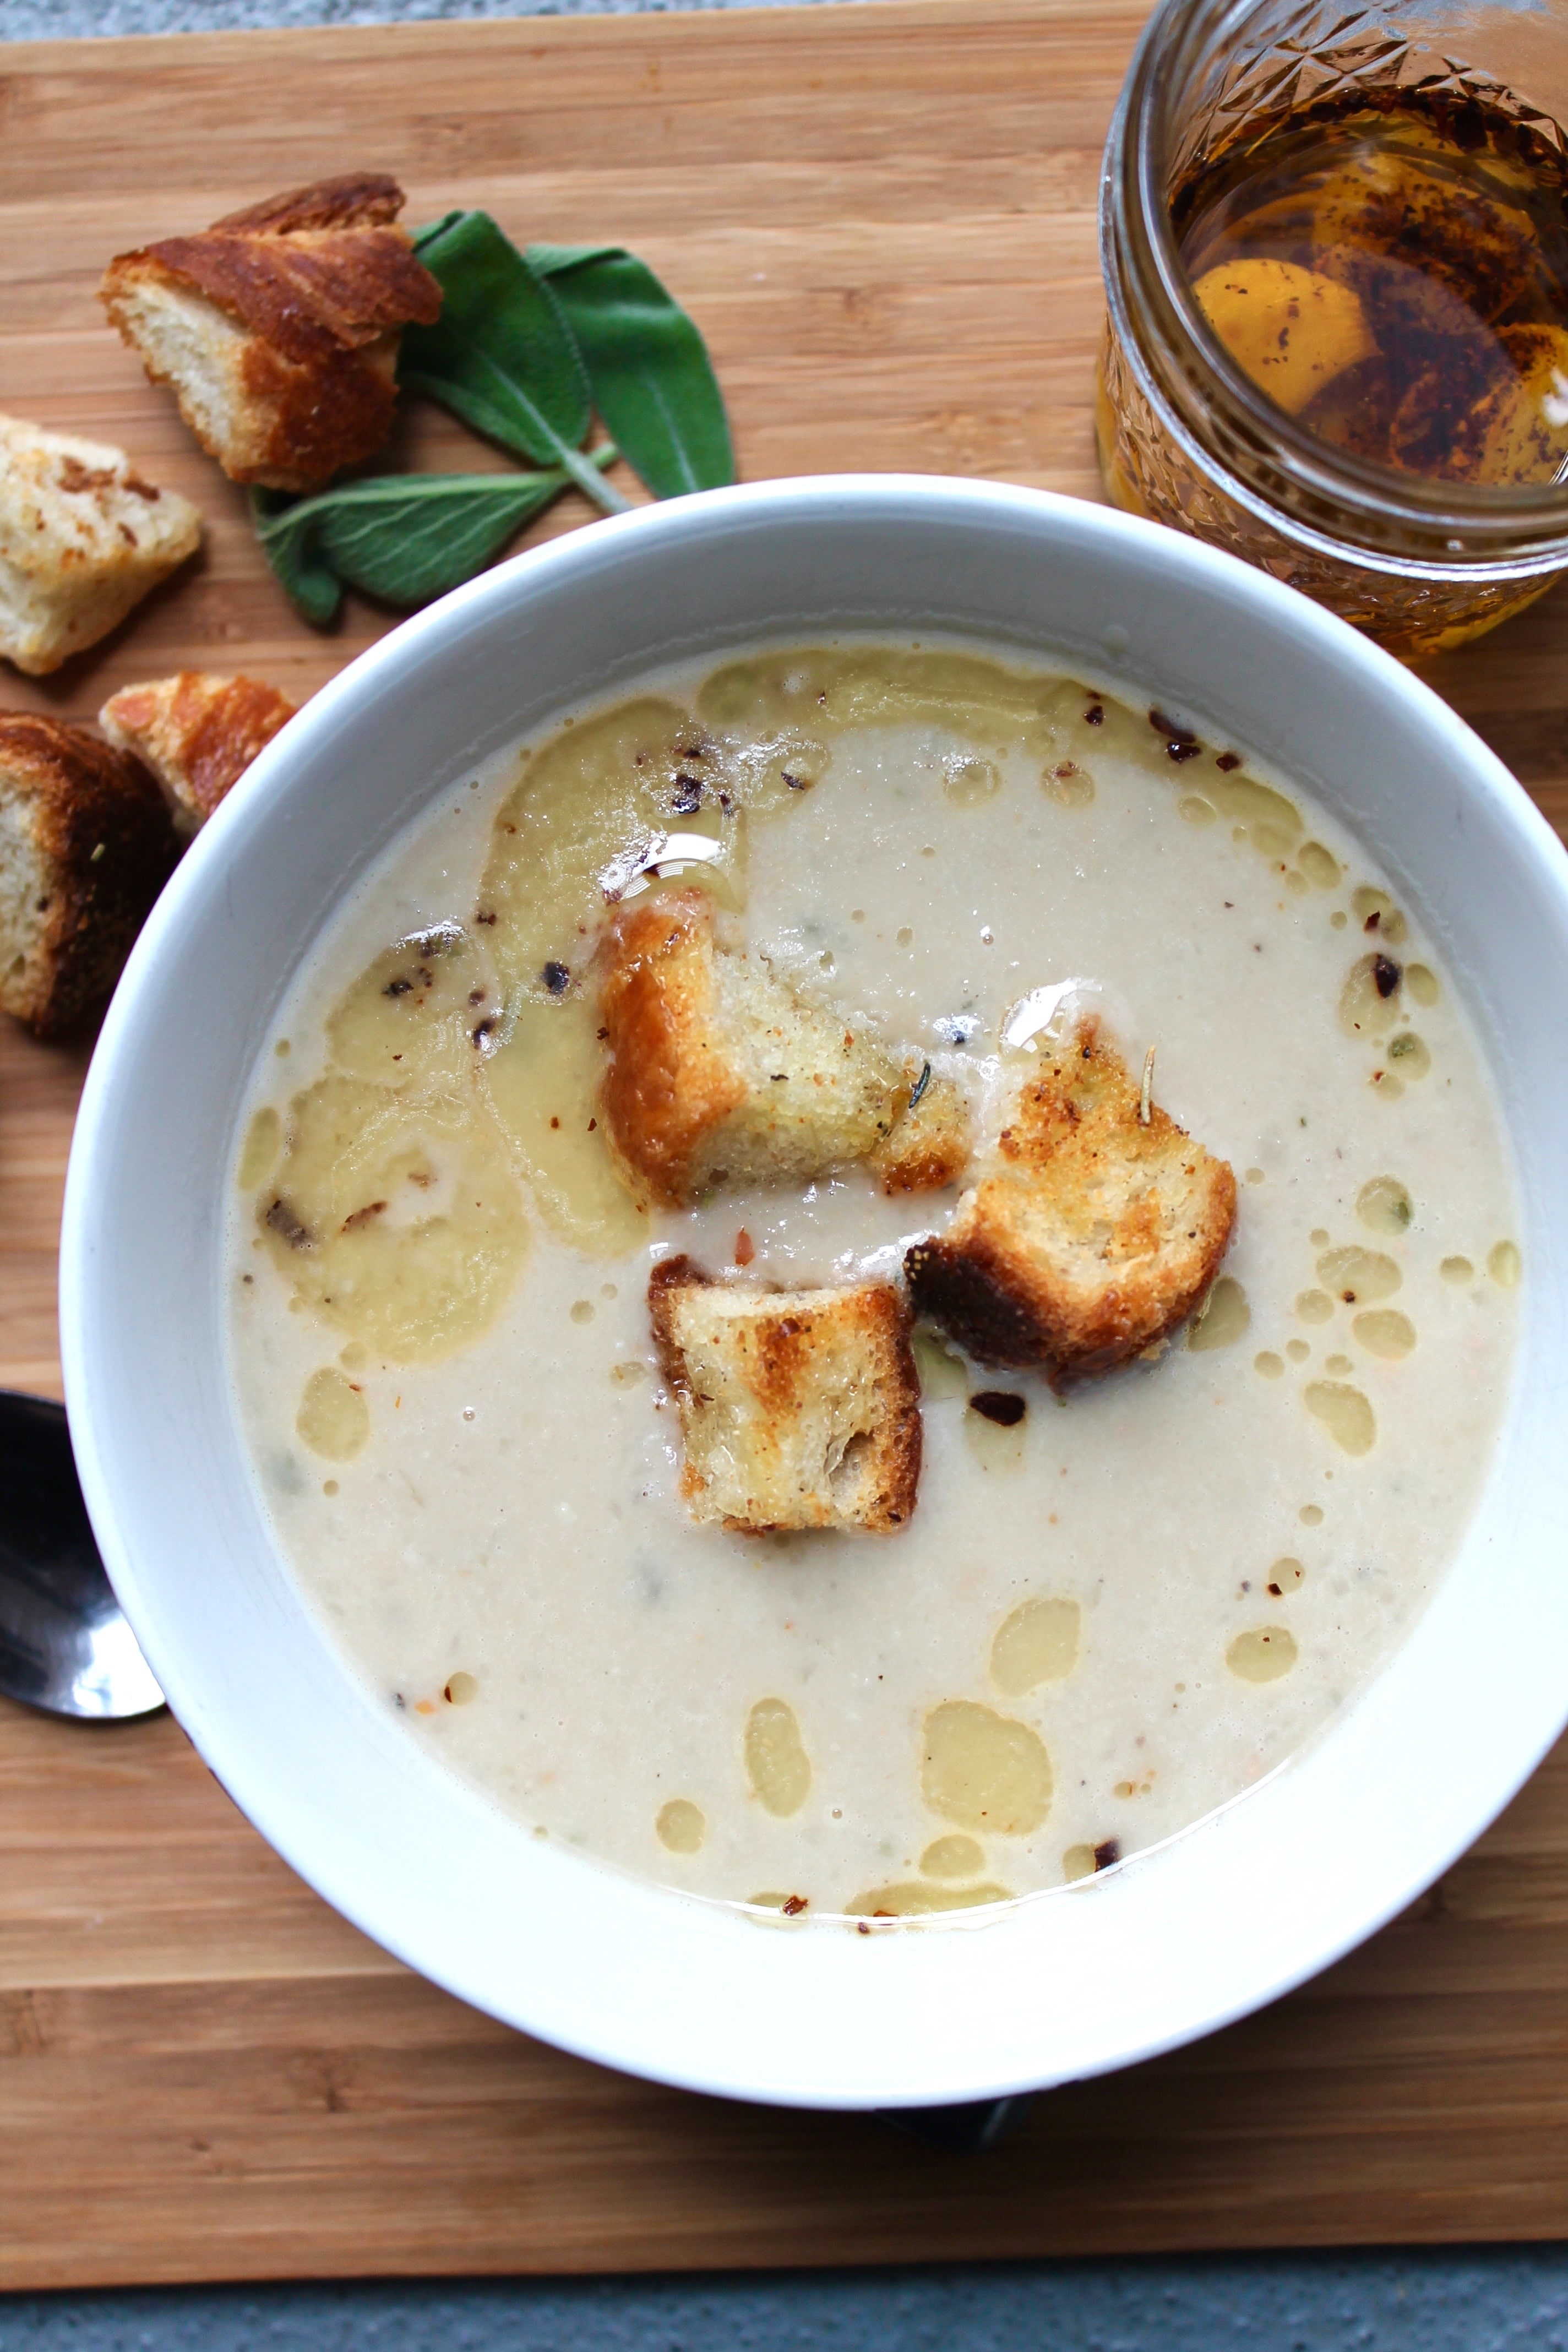 Tuscan White Bean Soup with Herb Croutons and Garlic Chili Oil